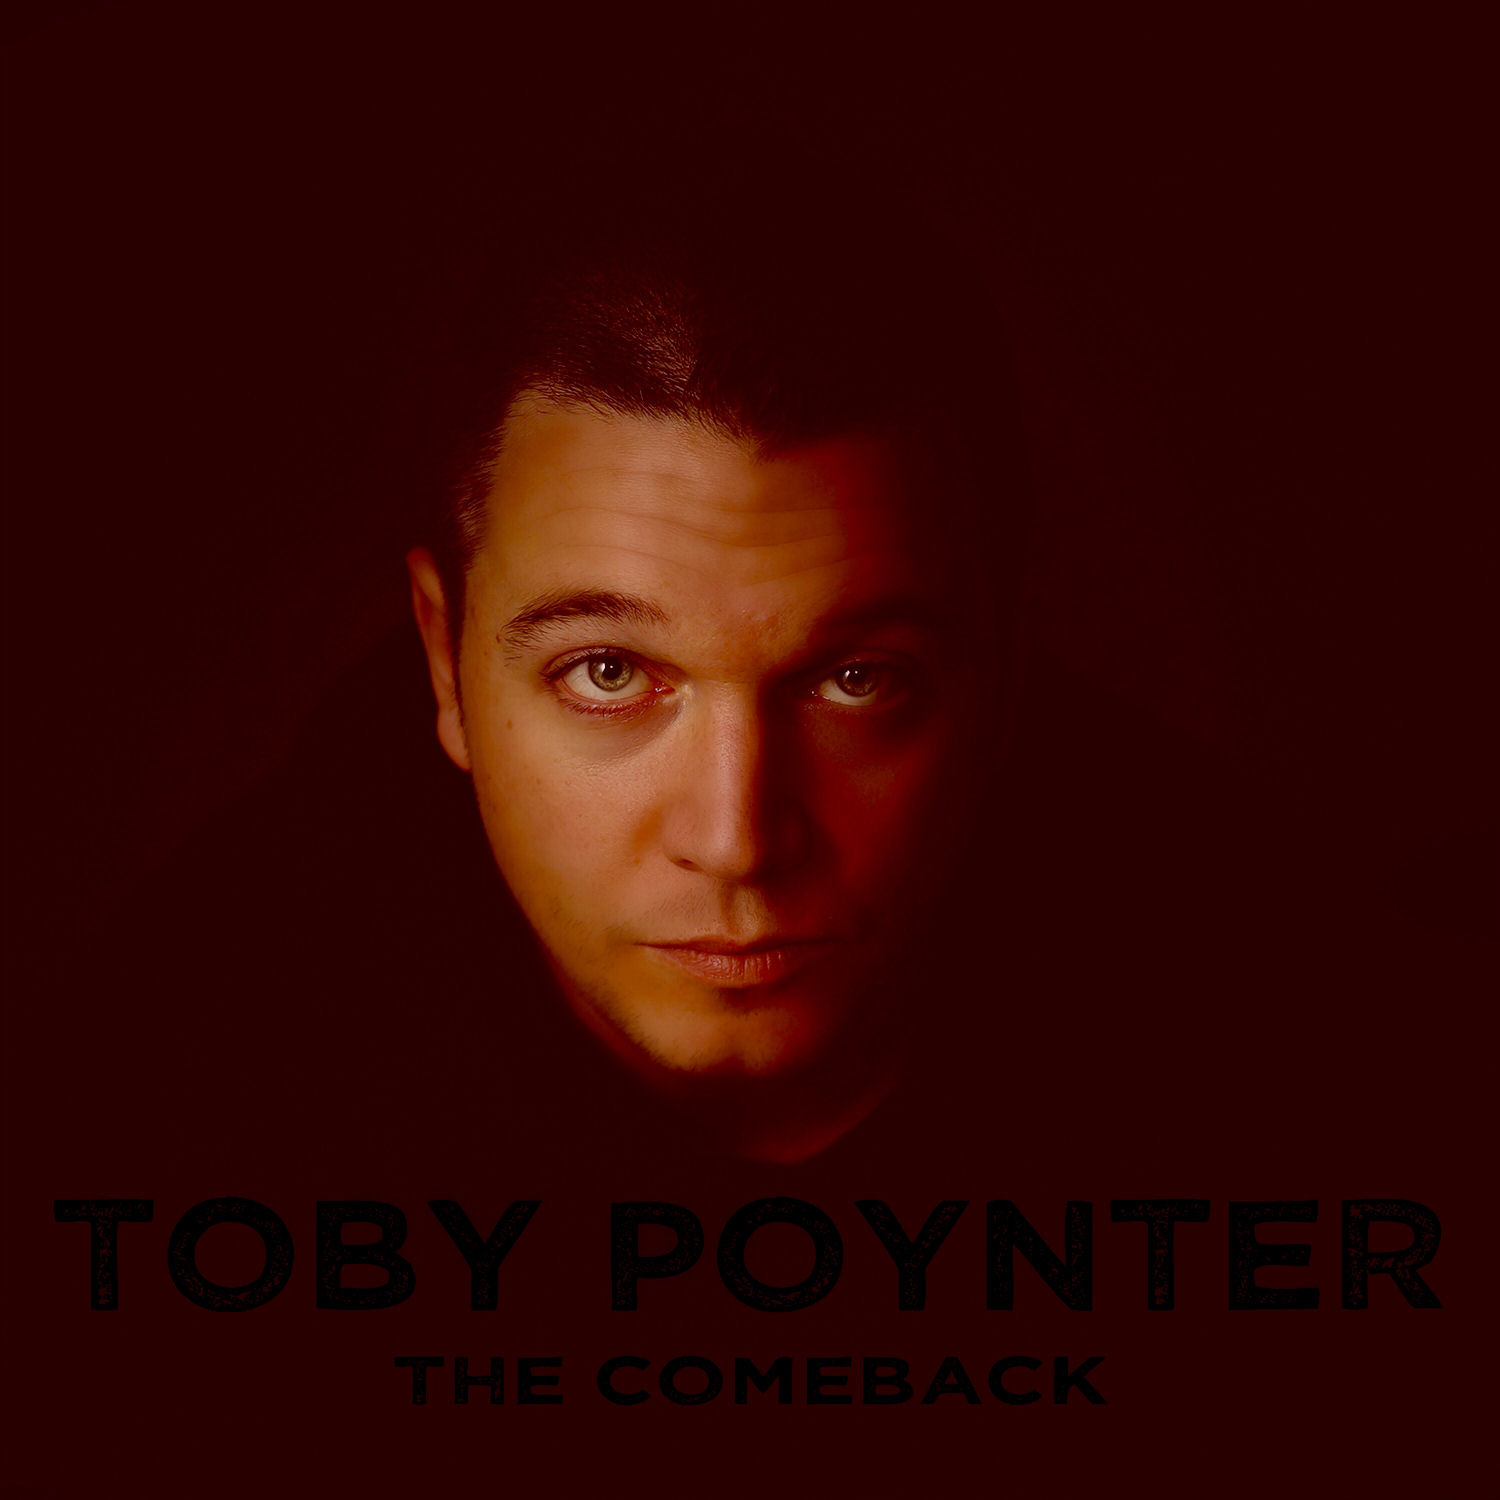  Toby Poynter – “A New Beginning”/”The Comeback”